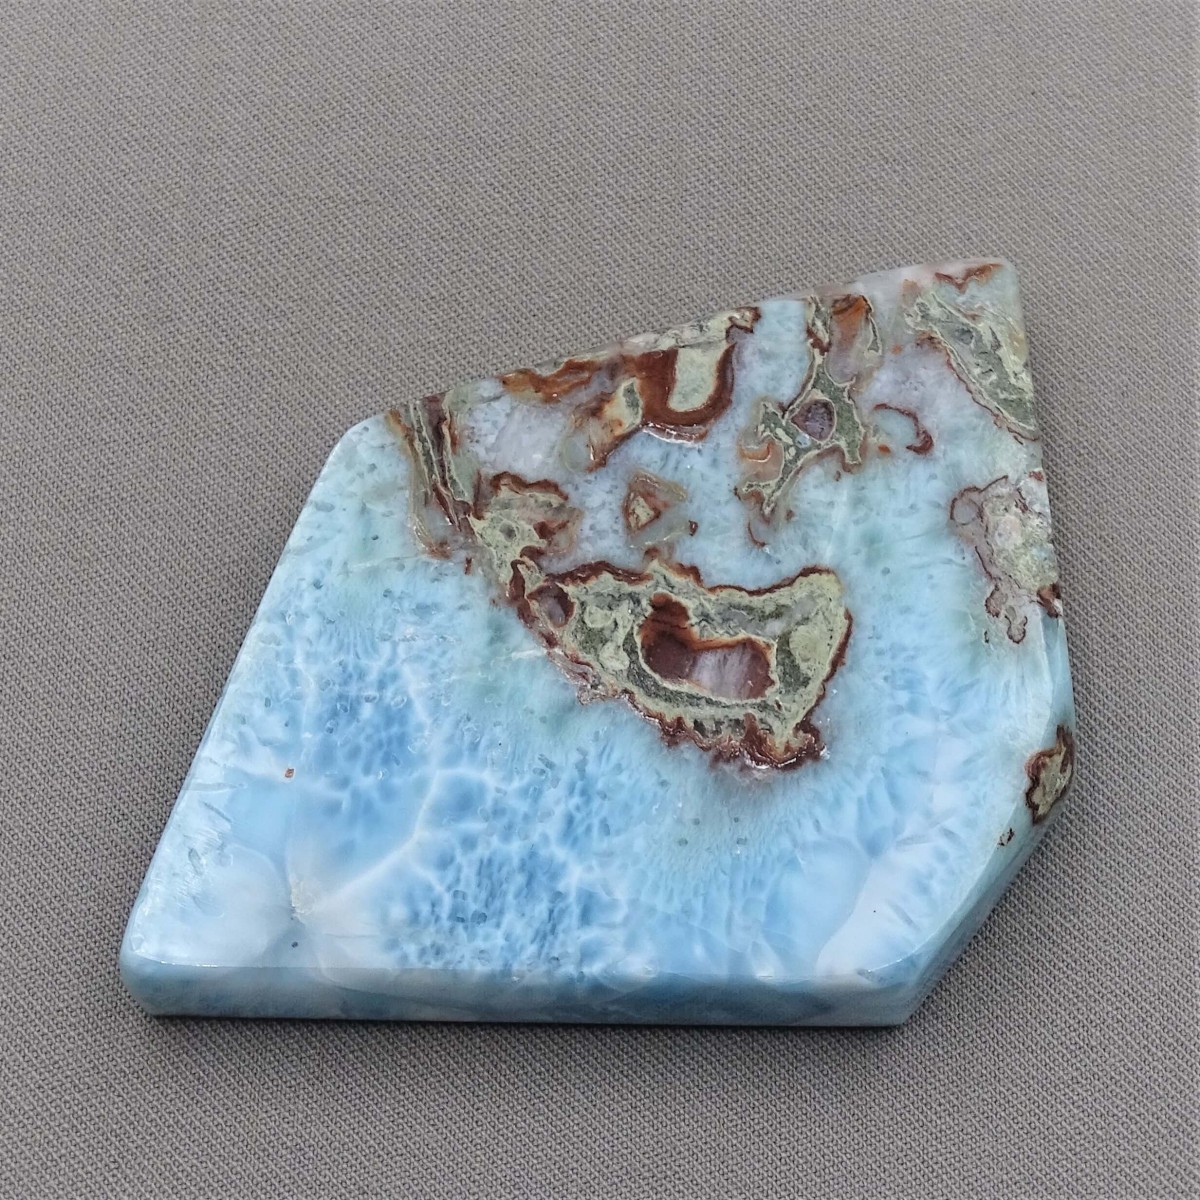 Larimar plate polished 69g, Dominican republic